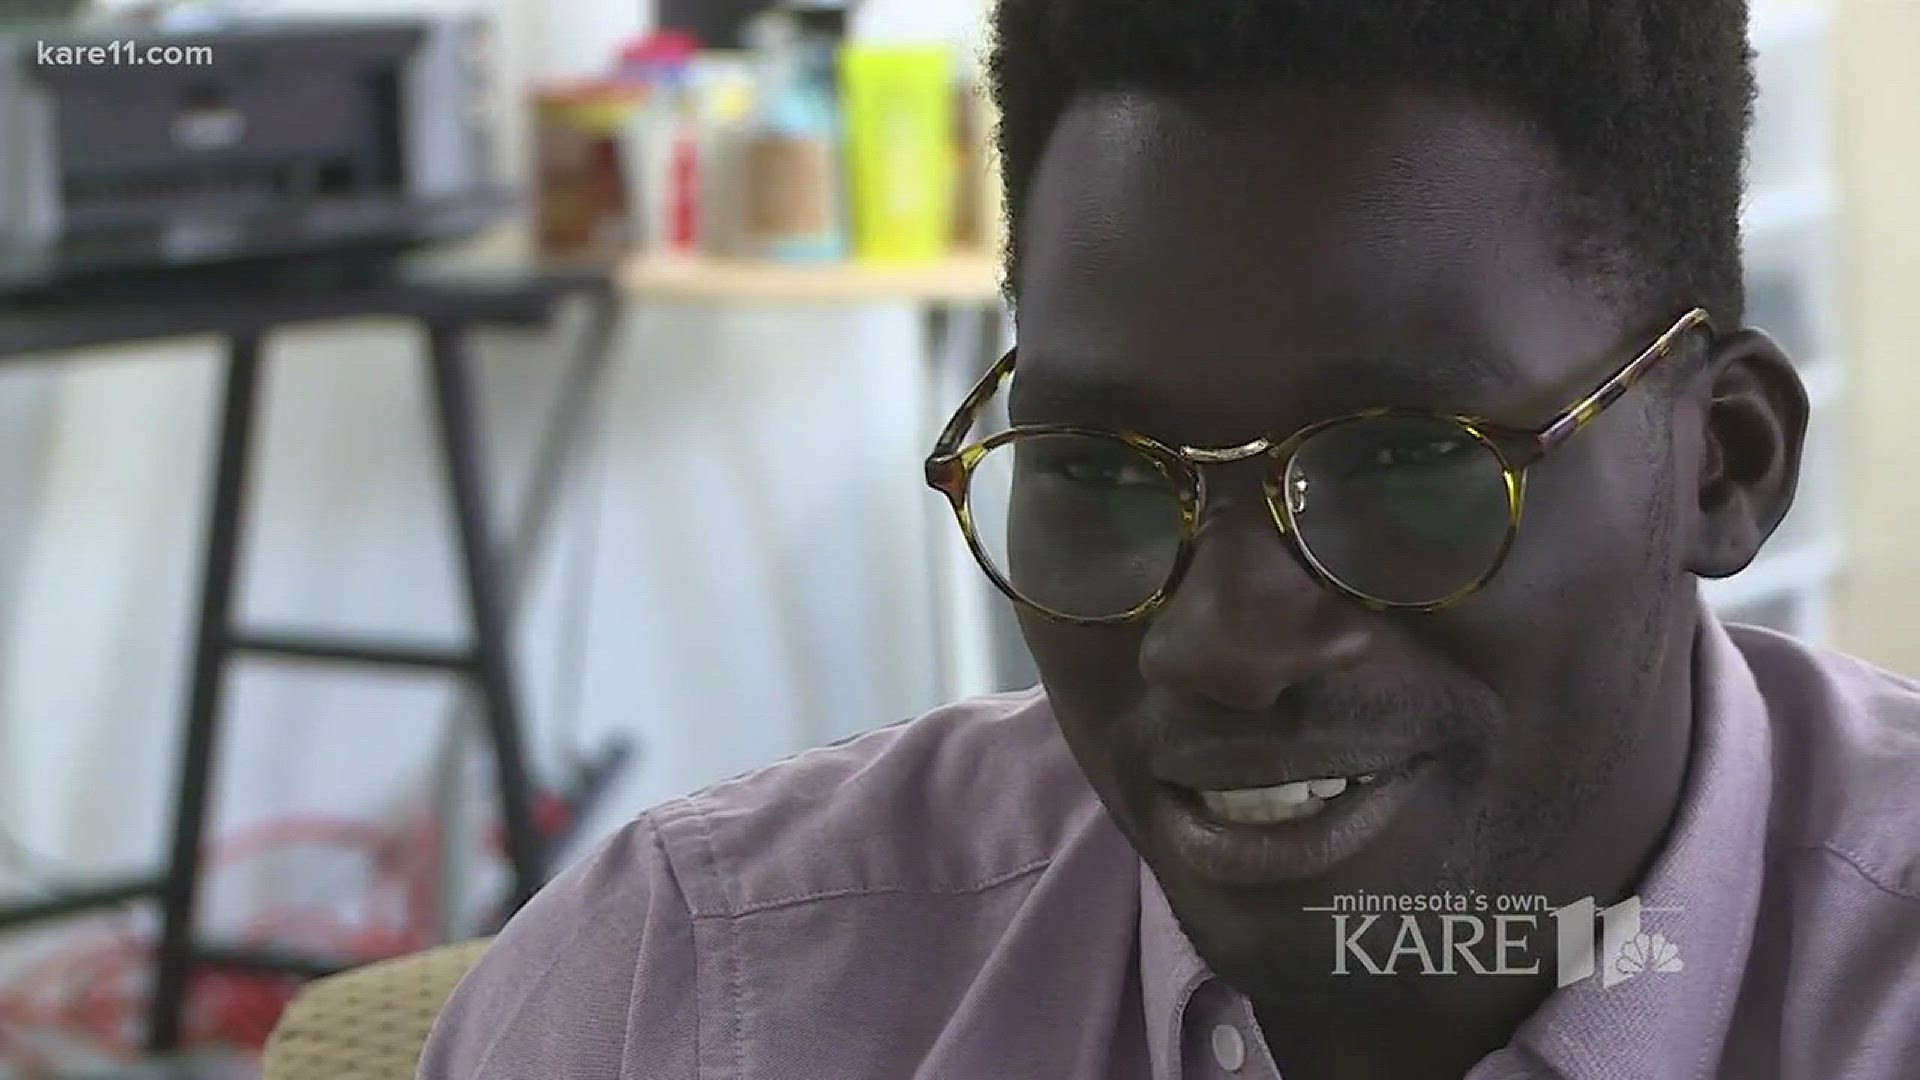 In 1999, Isaac Tut and his family came to the U.S. from war-torn Sudan. Now, he's teamed up with a college friend to start Minnesota's first taproom delivery service. http://kare11.tv/2mVjuHu